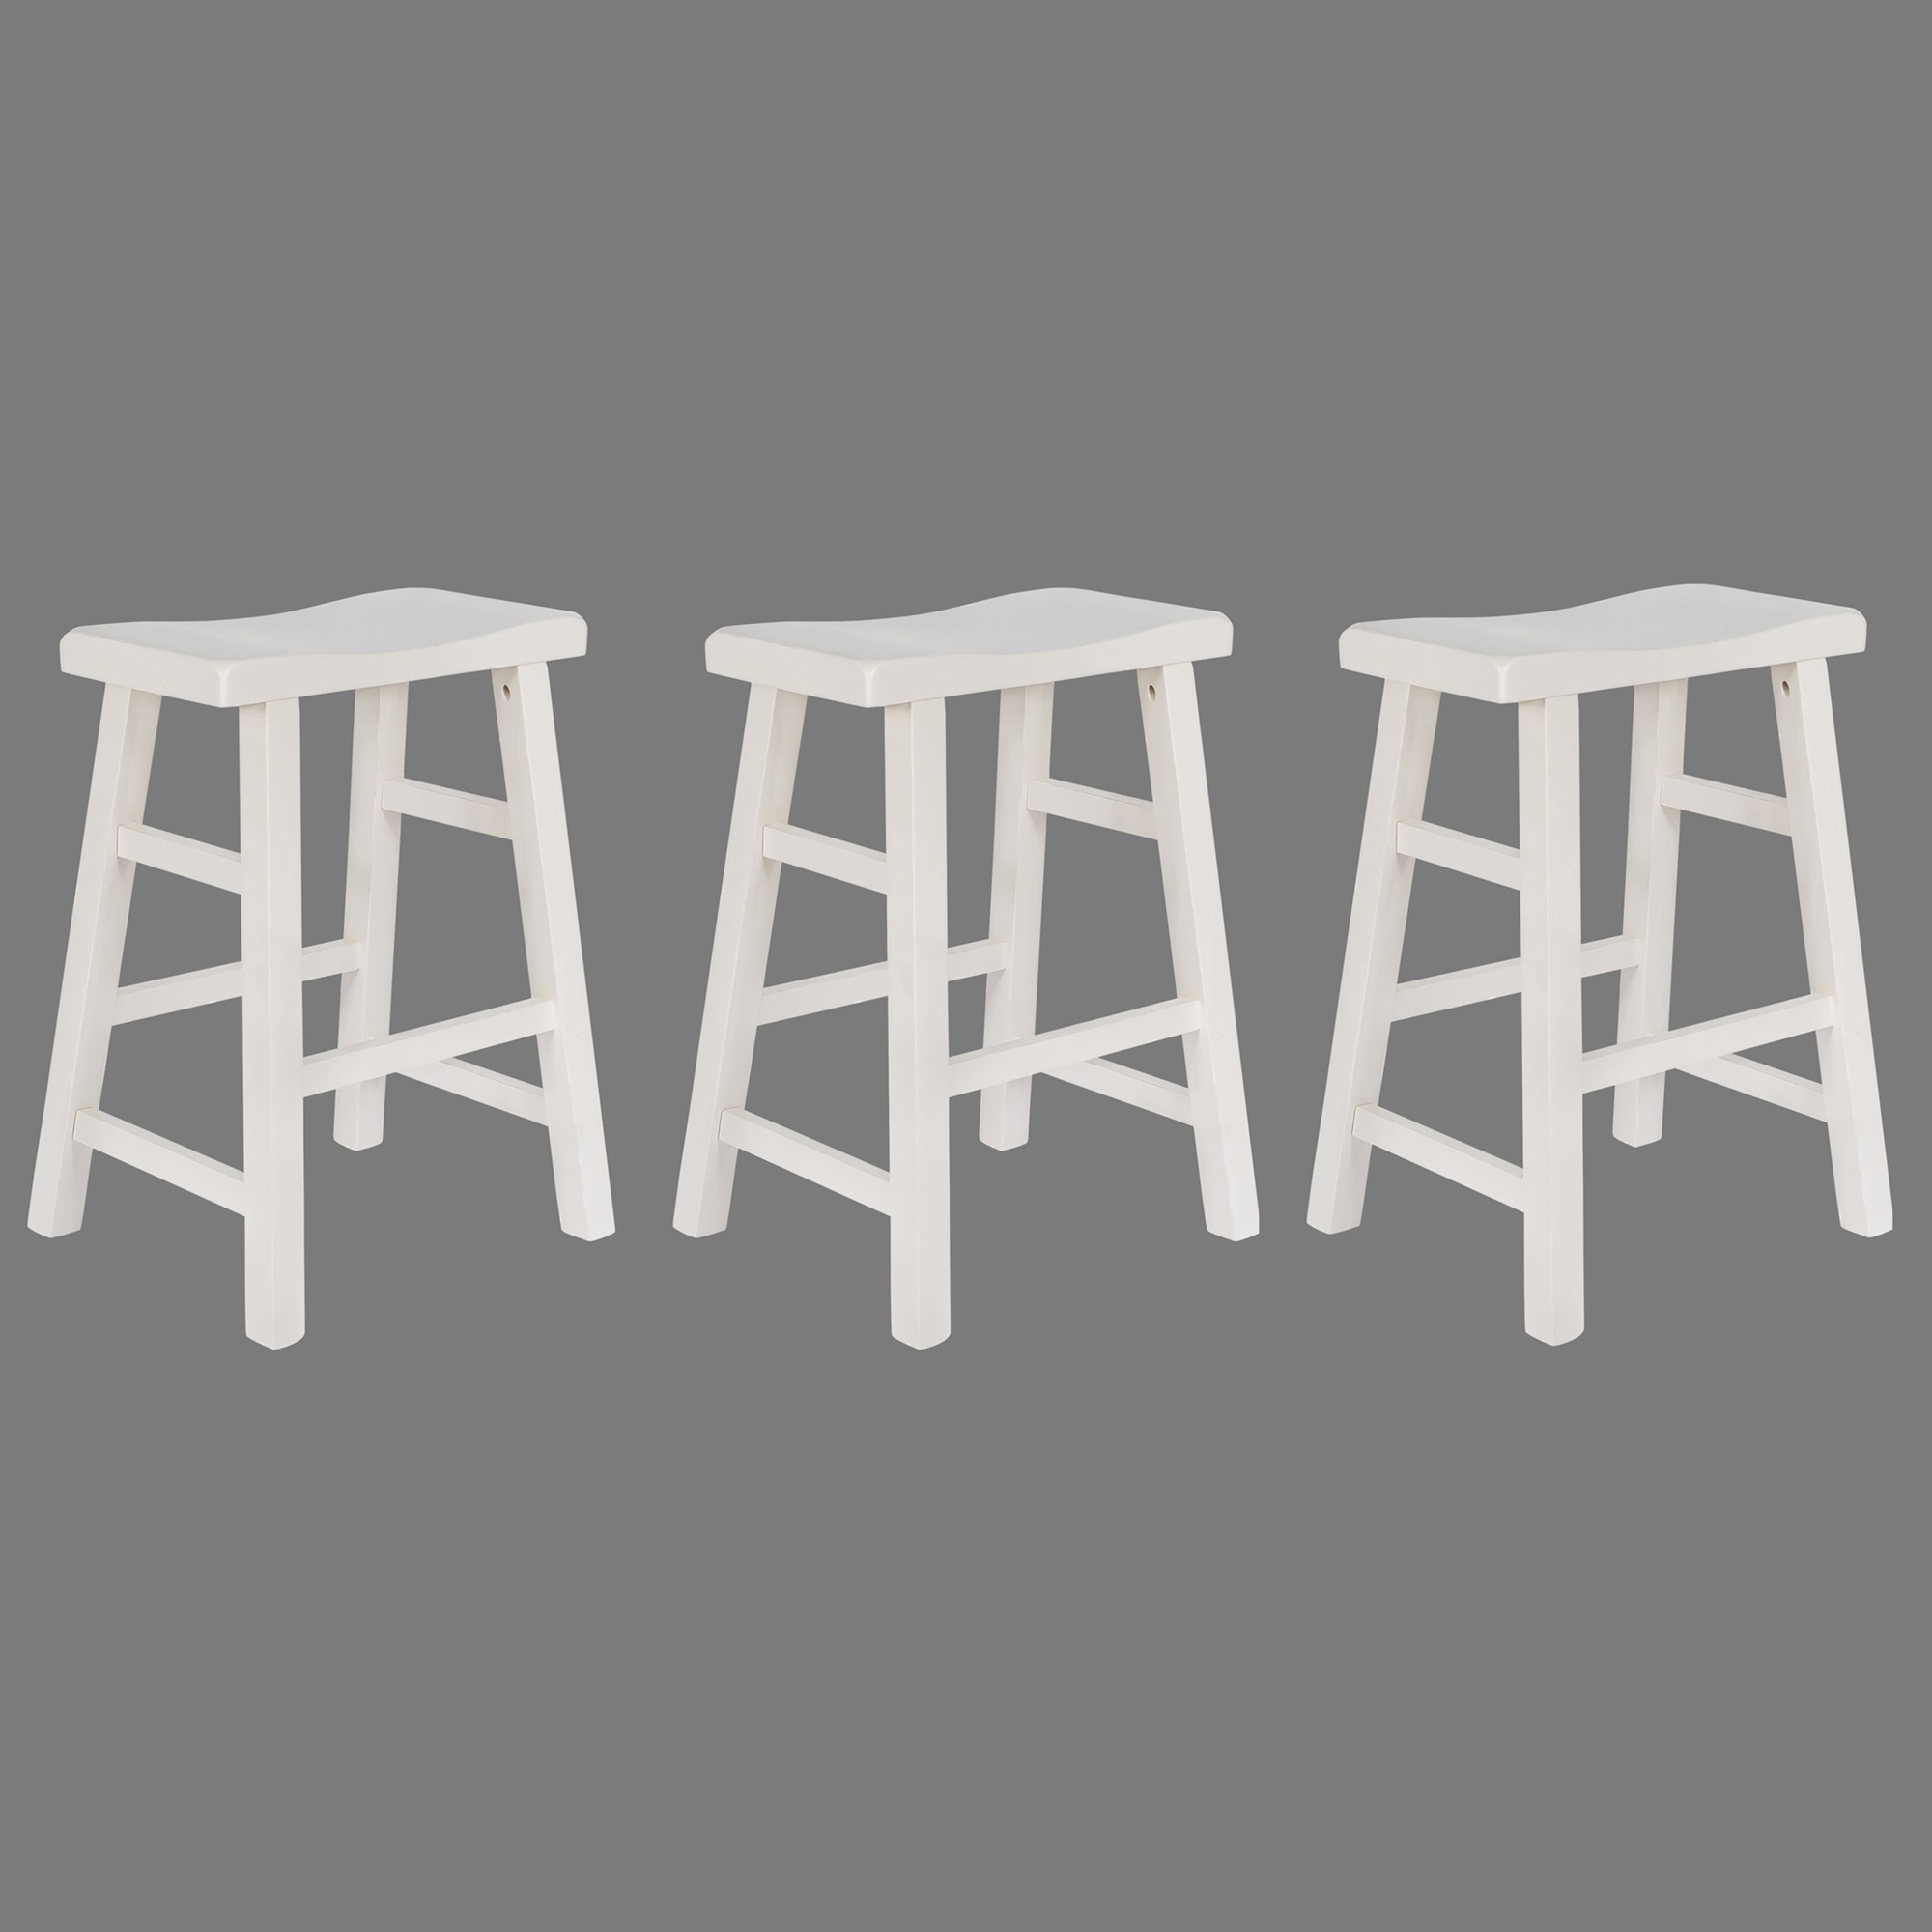 eHemco Heavy-Duty Solid Wood Saddle Seat Kitchen Counter Height Barstools, 24 Inches, White, Set of 3 - image 2 of 6